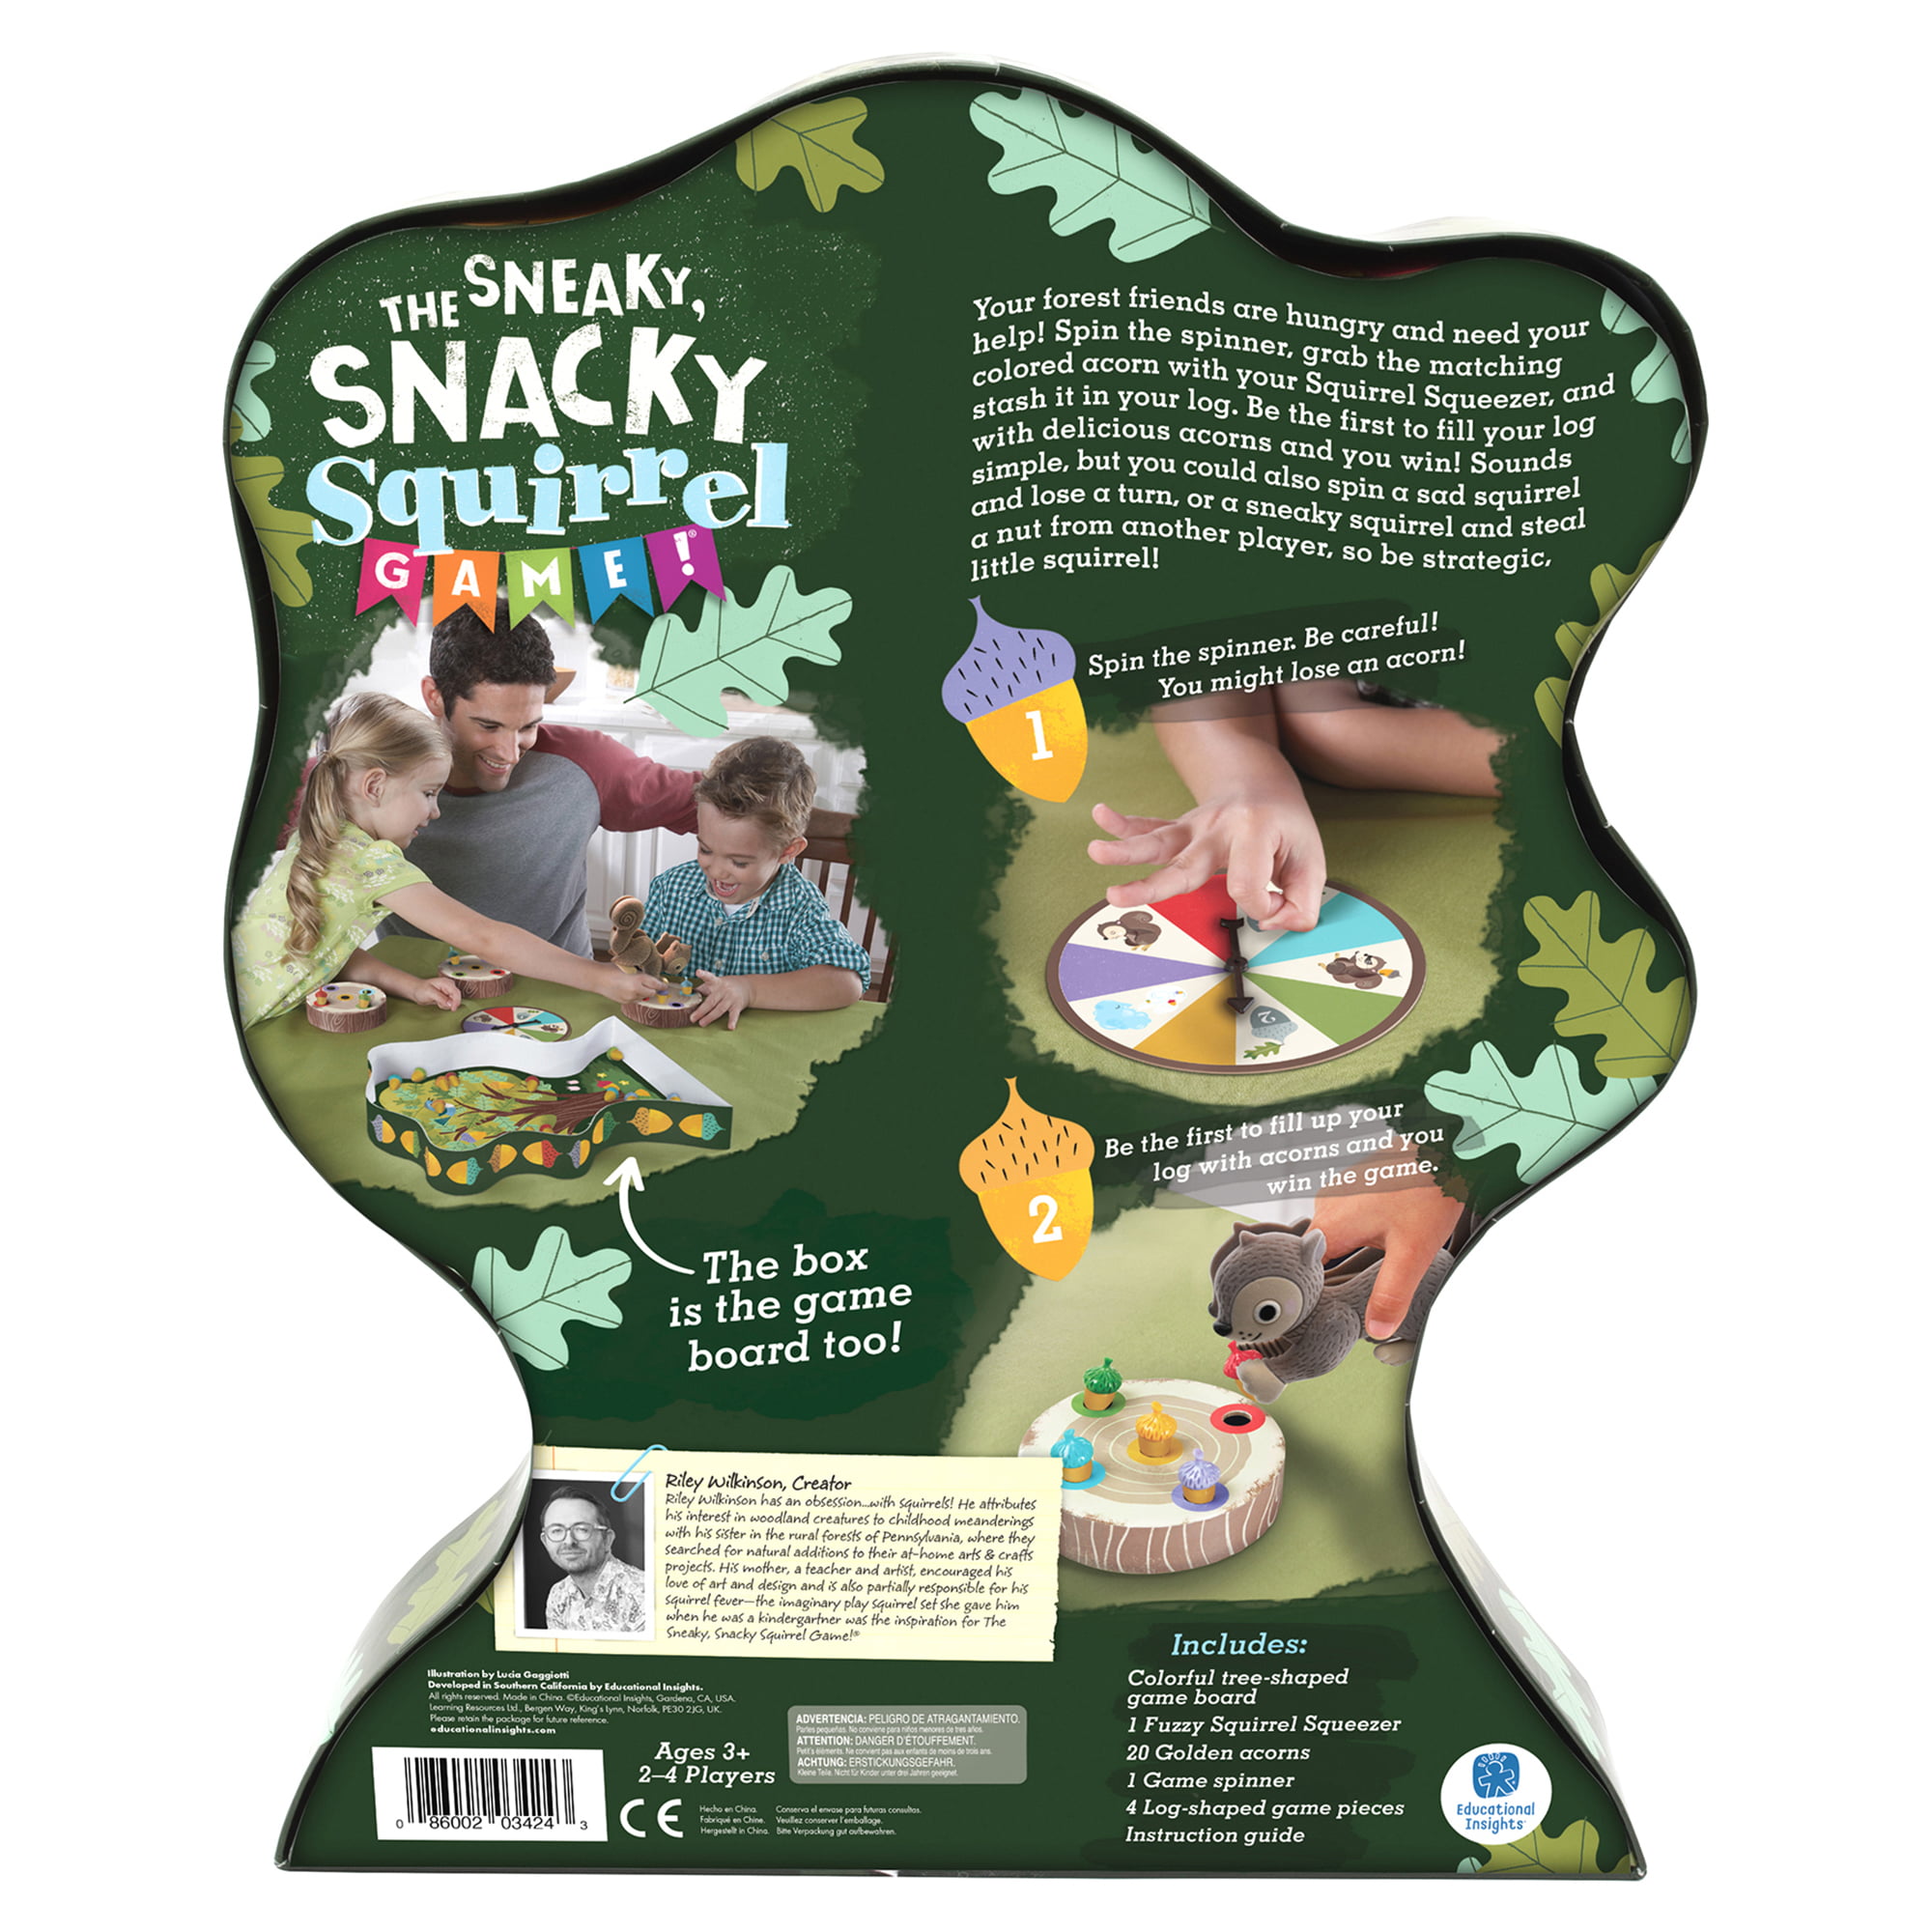 The Sneaky Snacky Squirrel Game 10th